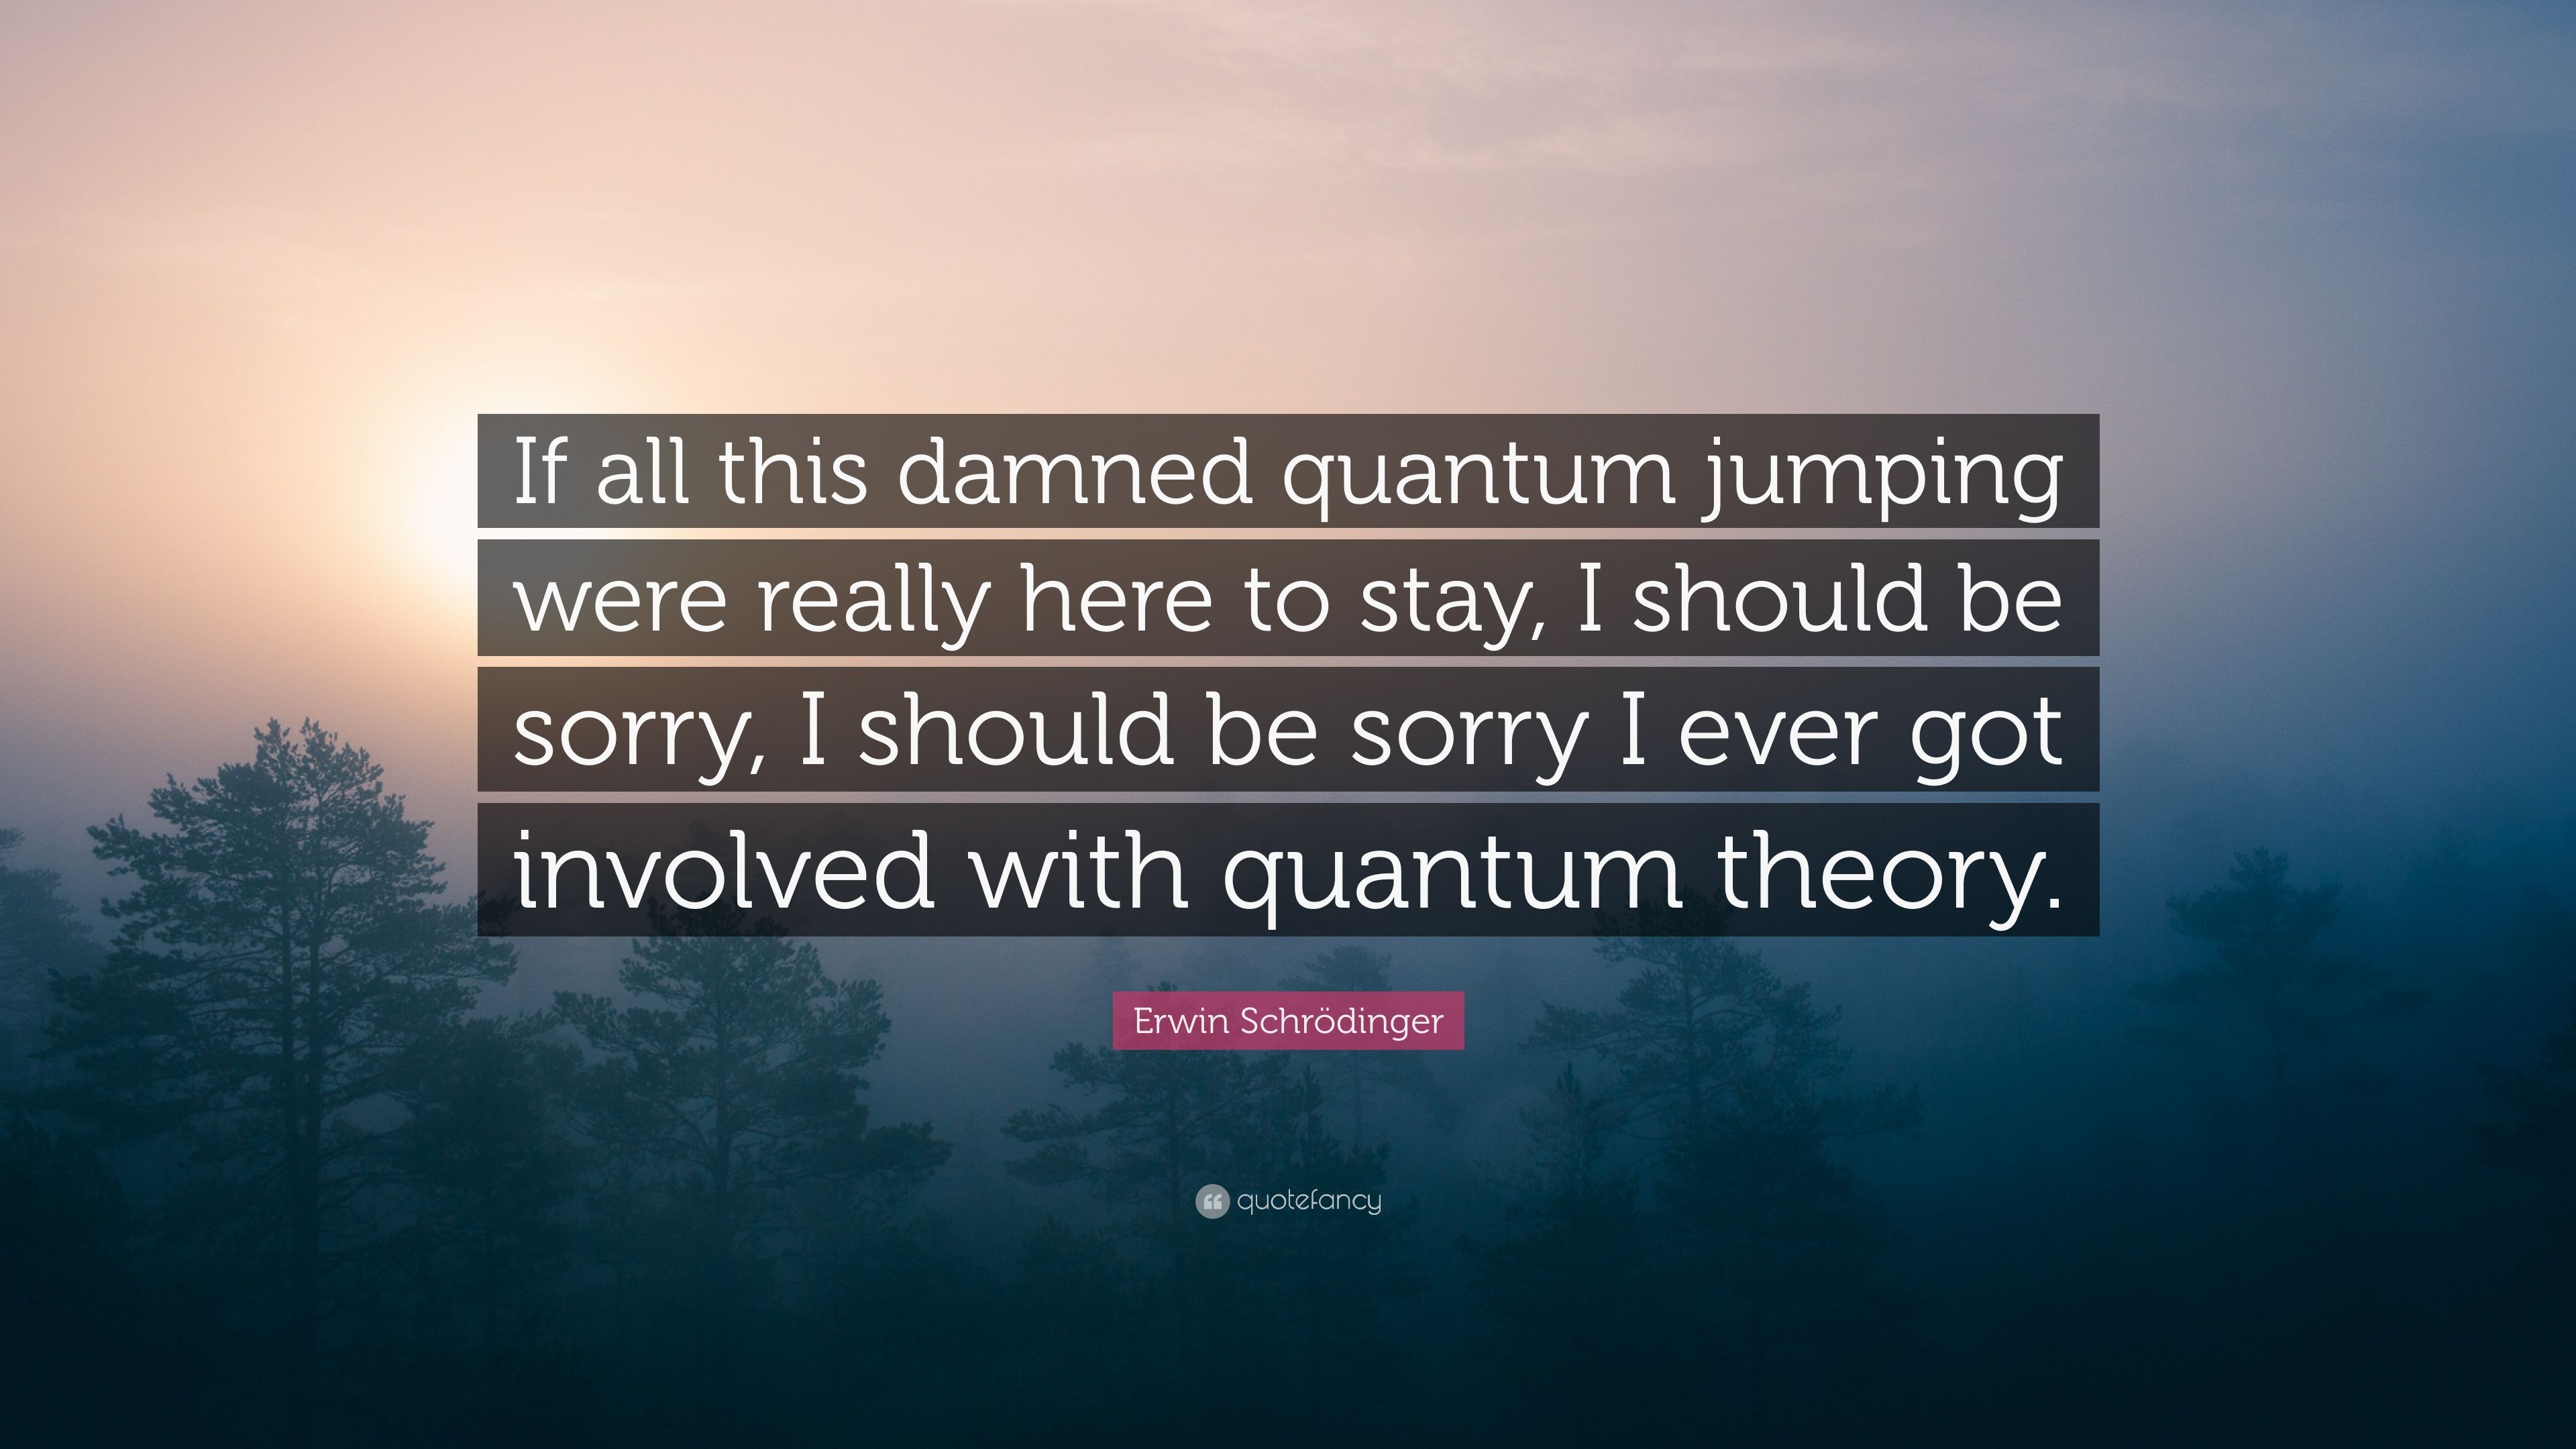 If all this damned quantum jumping were .quotefancy.com